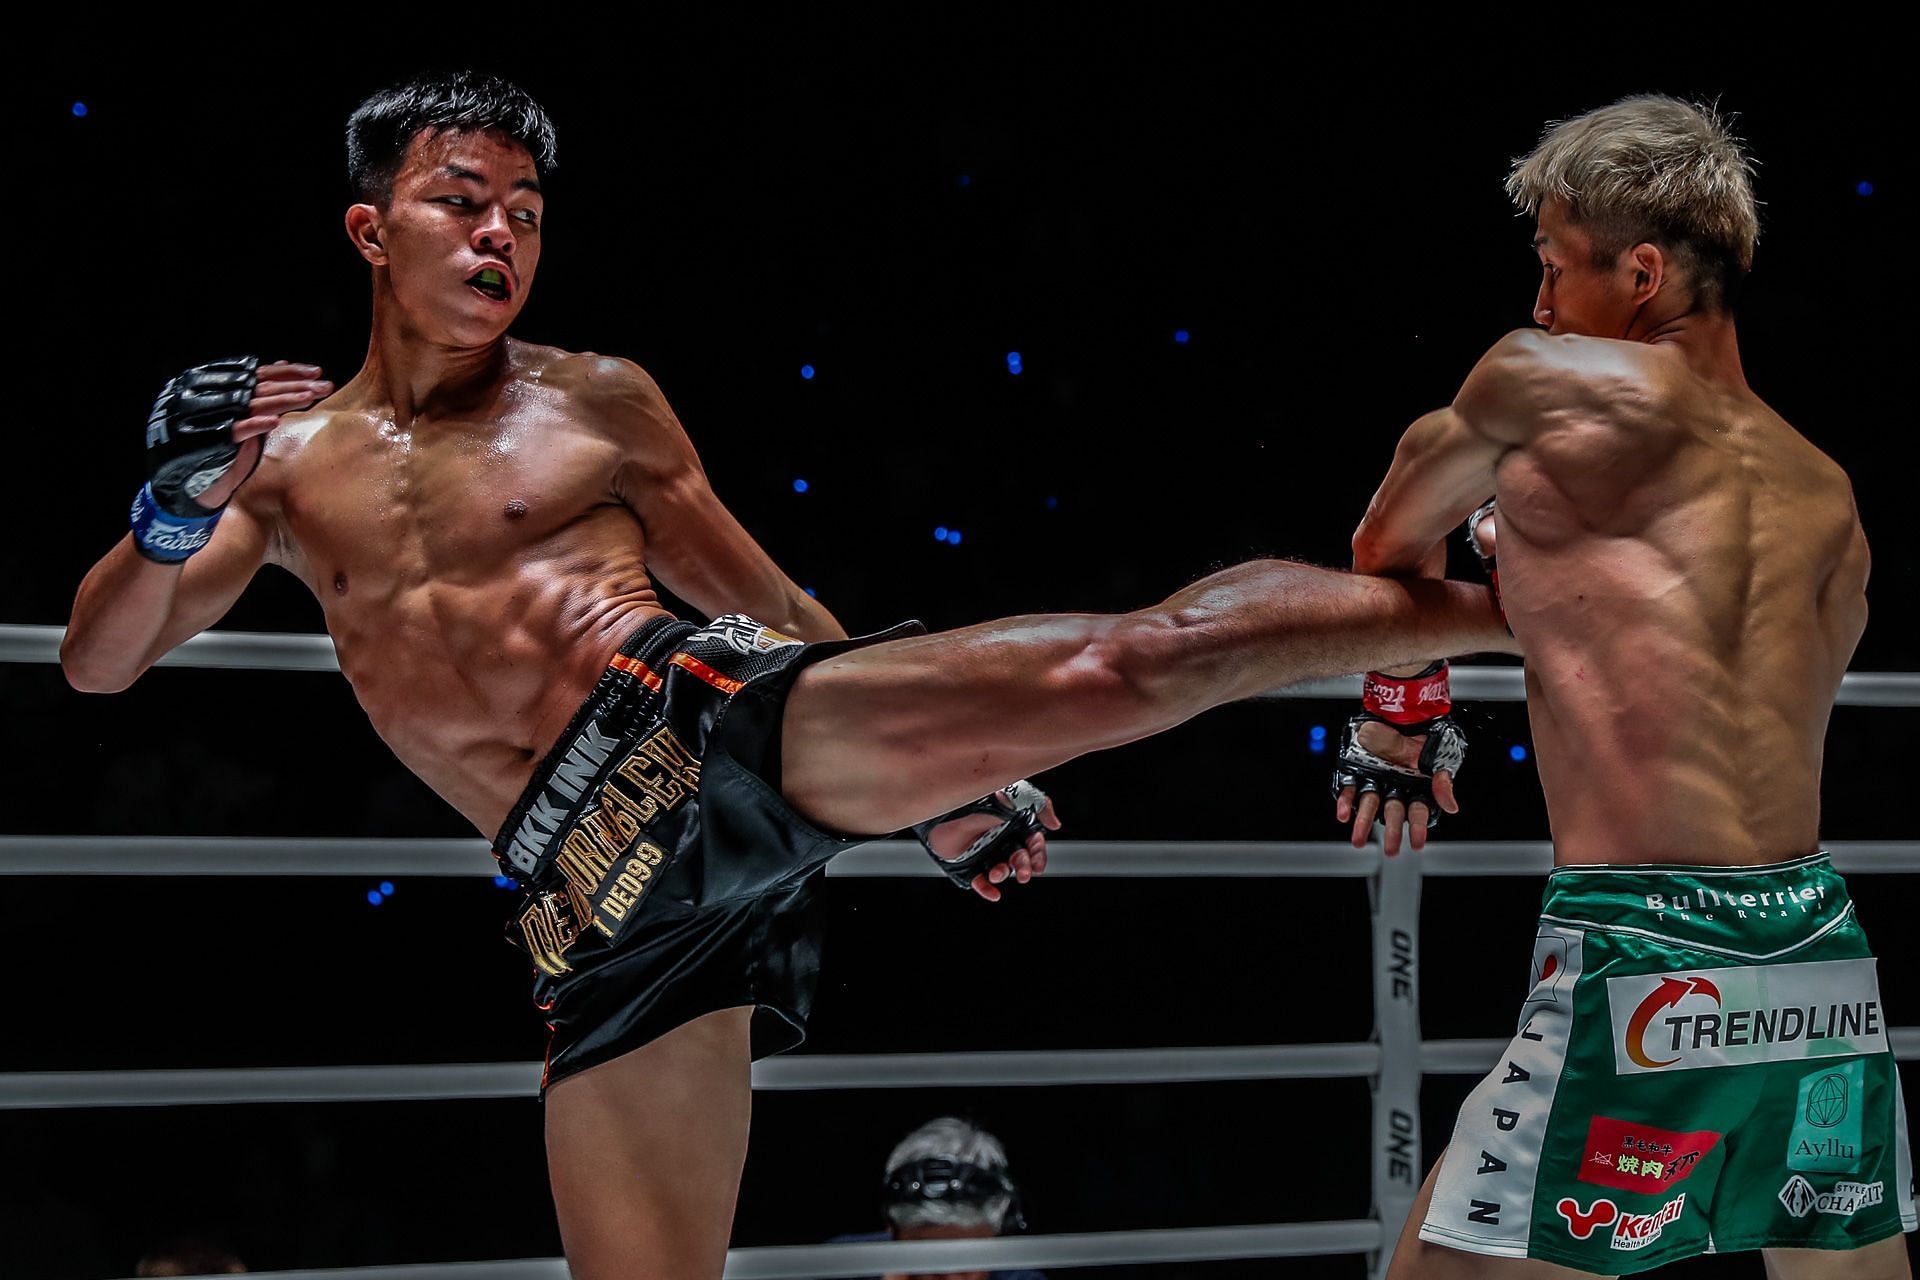 Dedduanglek throws a kick at Taiki Naito in their first encounter at Lumpinee Stadium. The pair will rematch on Saturday under kickboxing rules.